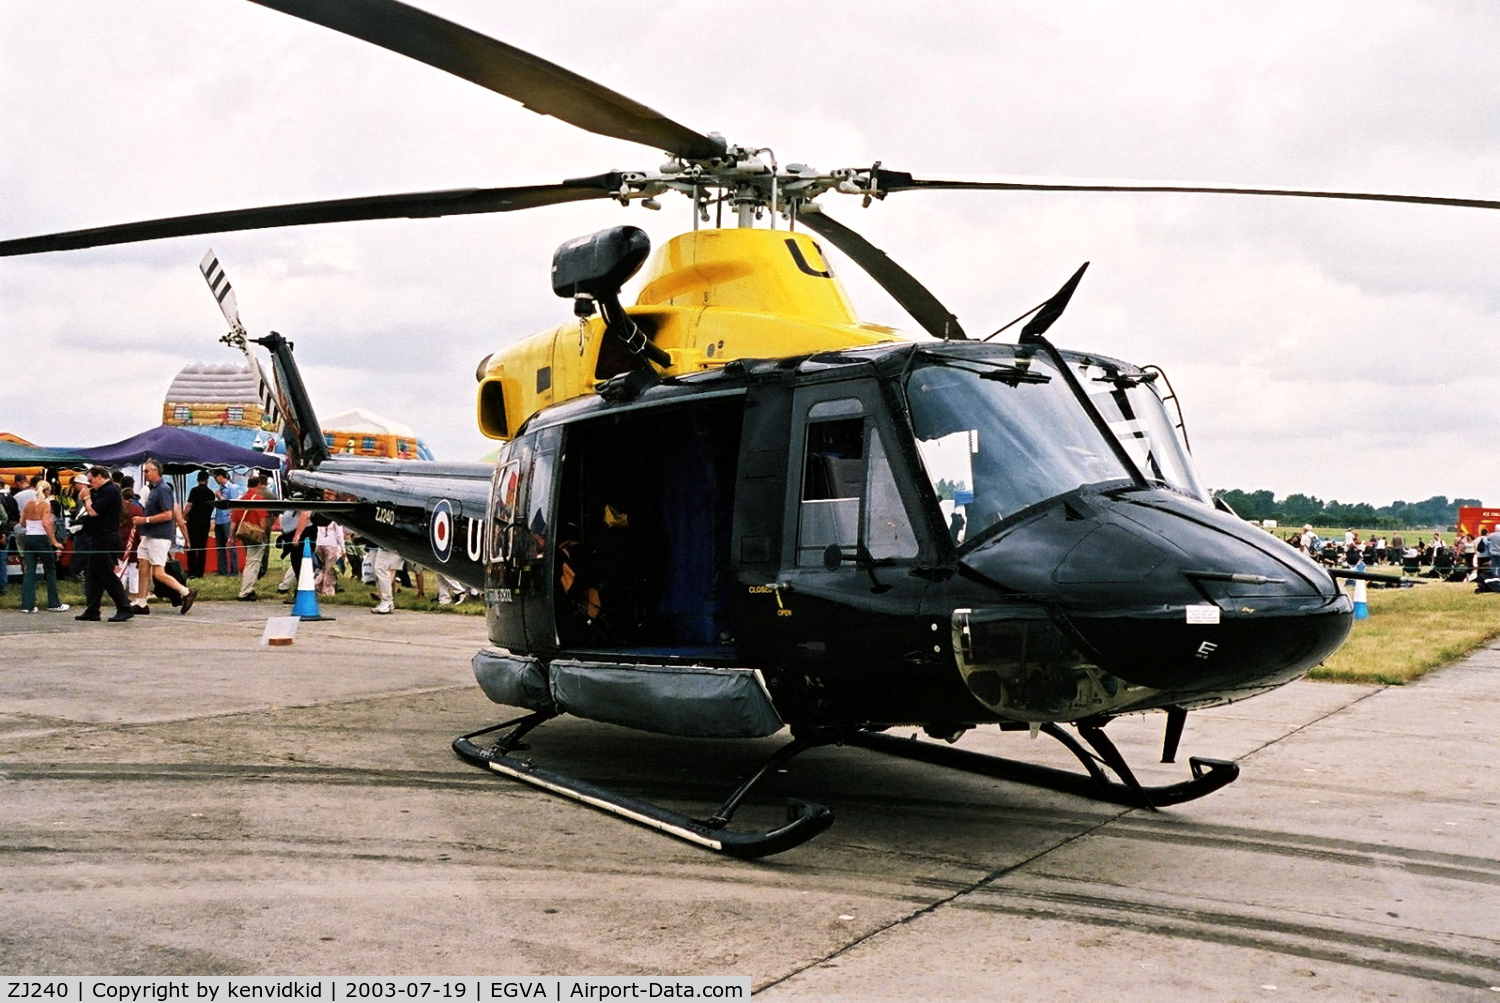 ZJ240, 1997 Bell 412EP Griffin HT1 C/N 36163, Royal Air Force at RIAT.